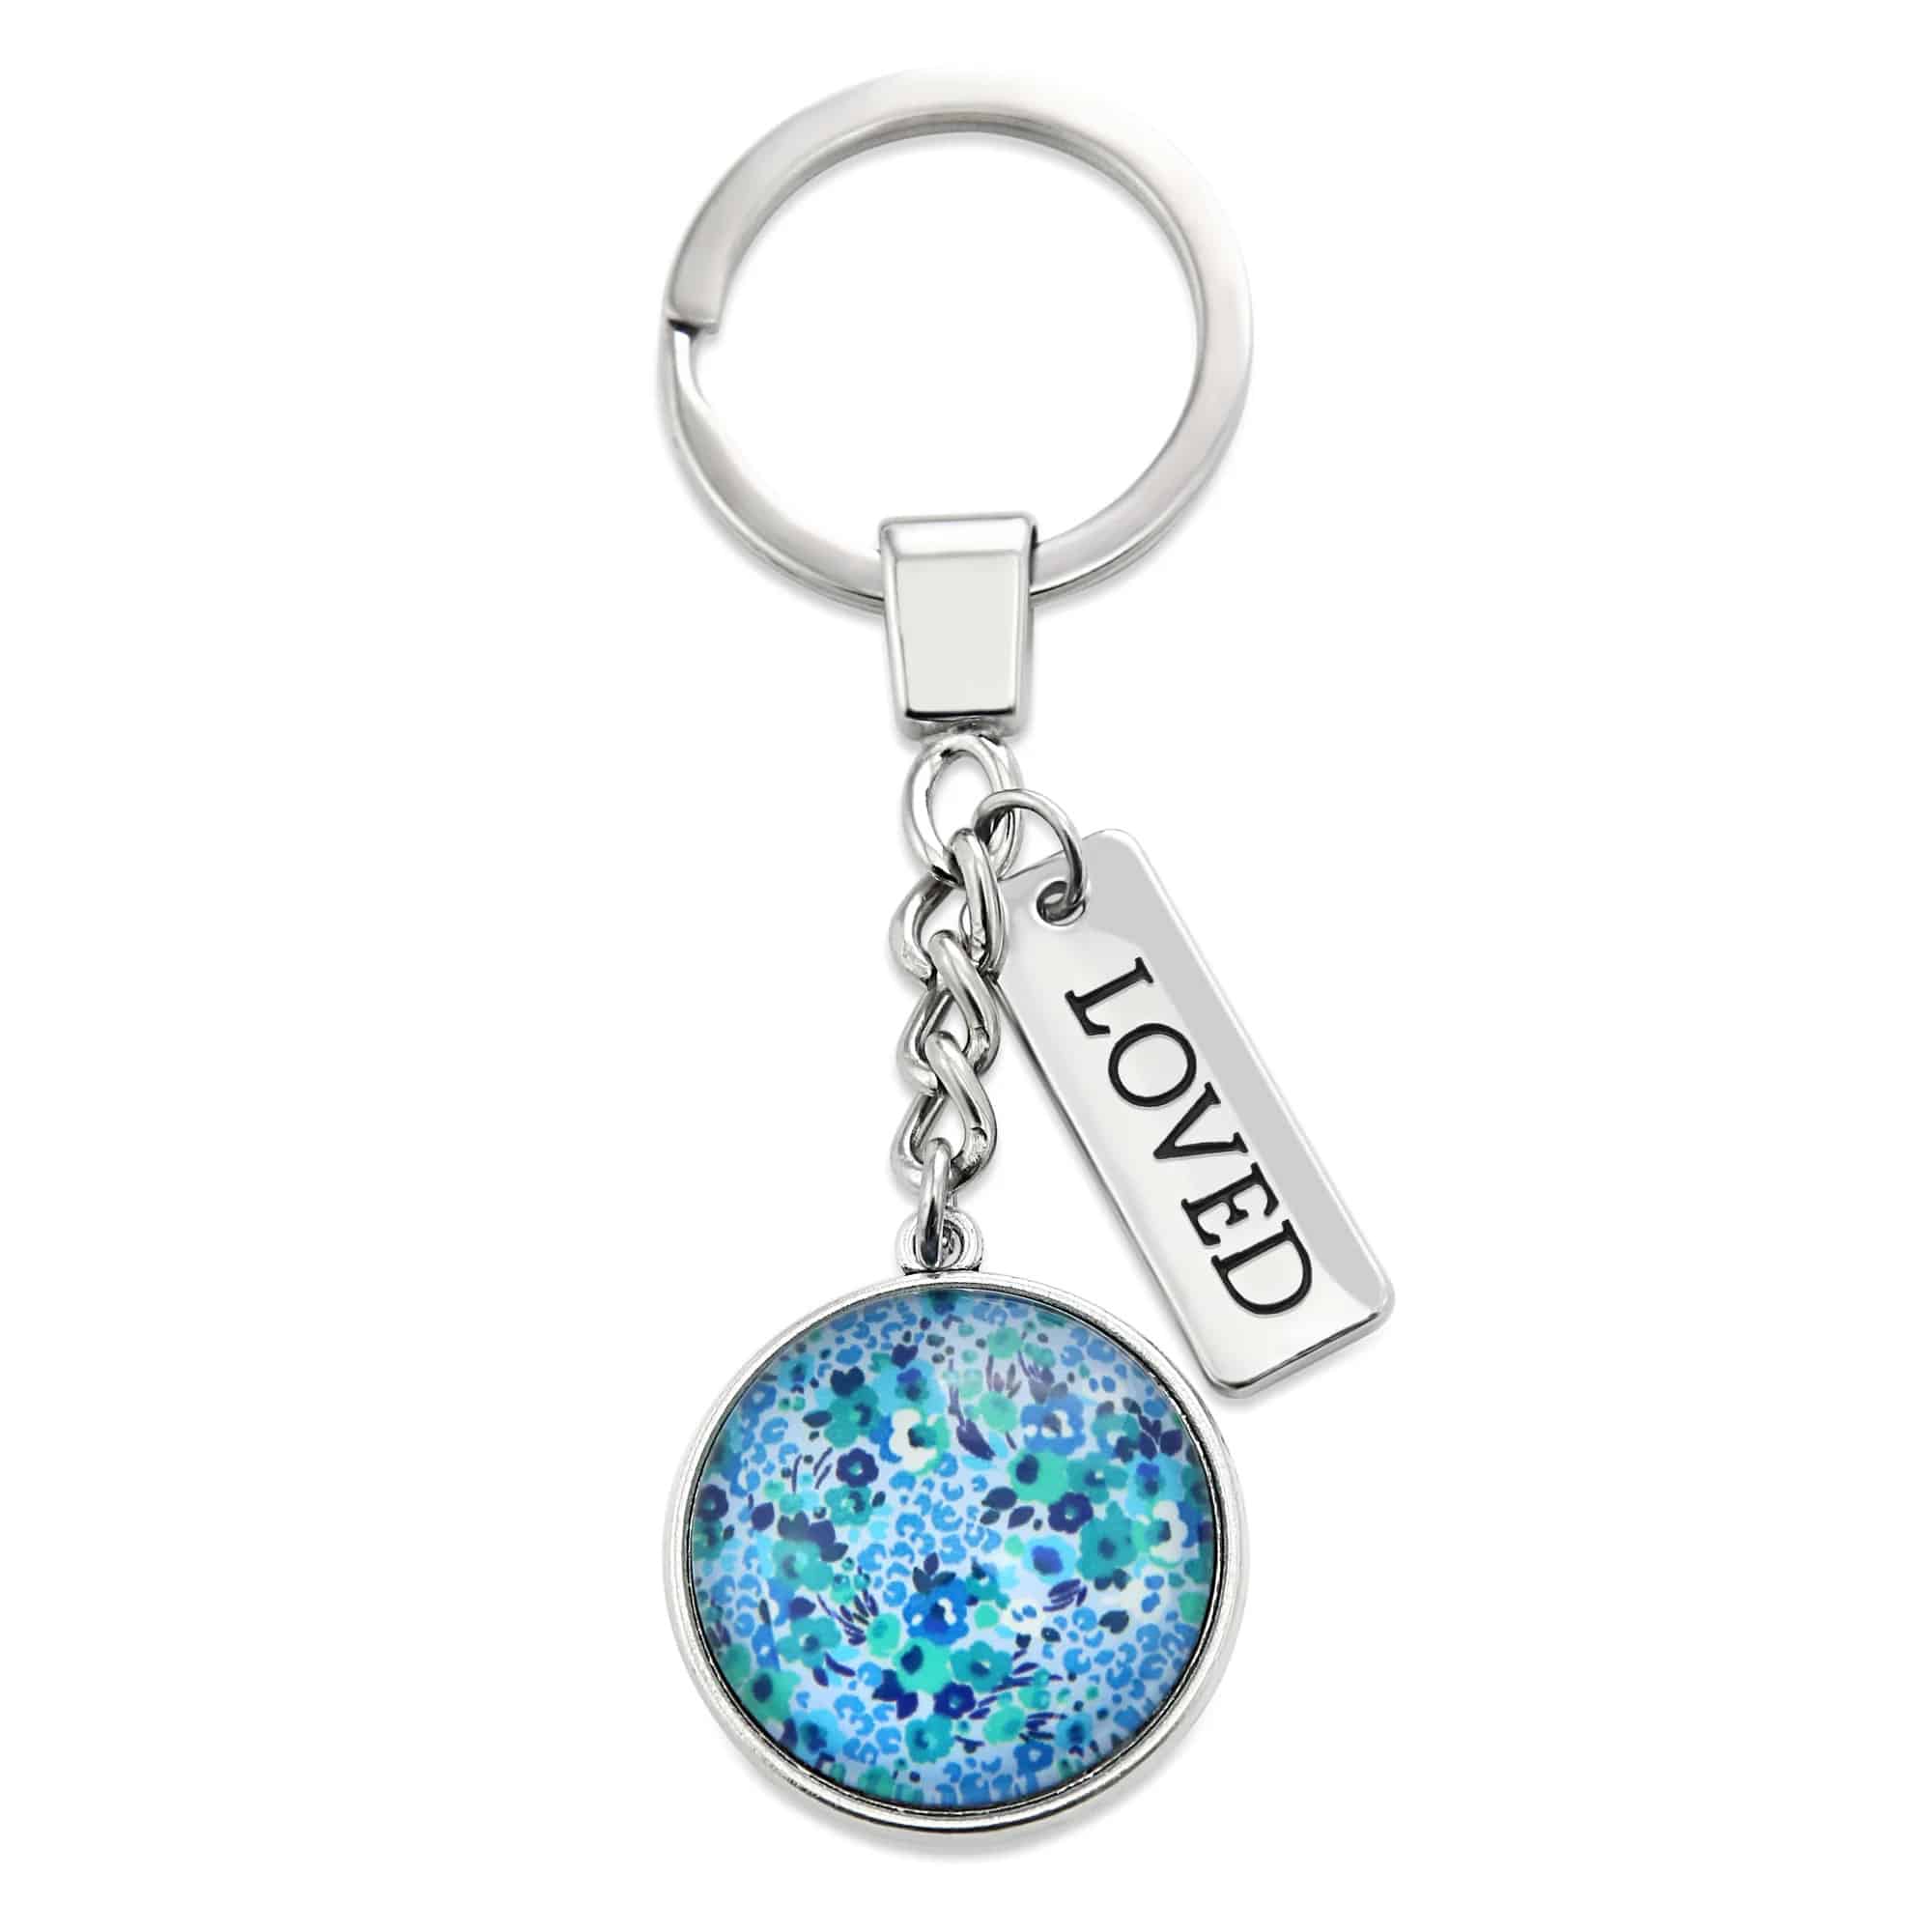 Mother's Day Gifts | Keyring | Beanstalk Mums